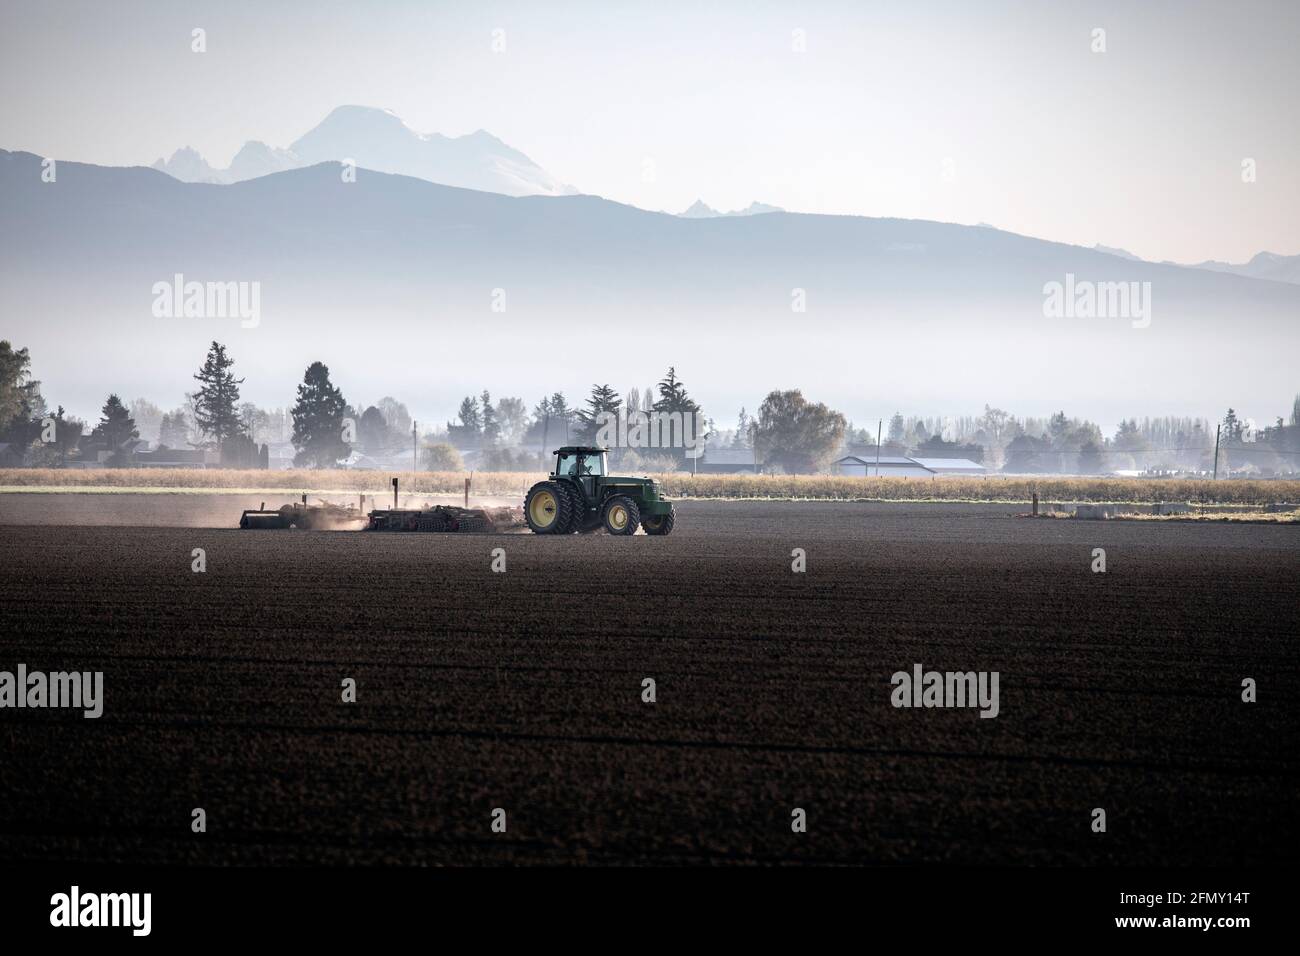 WA20192-00....WASHINGTON - Tractor plowing a field in the Skagit Valley. Stock Photo